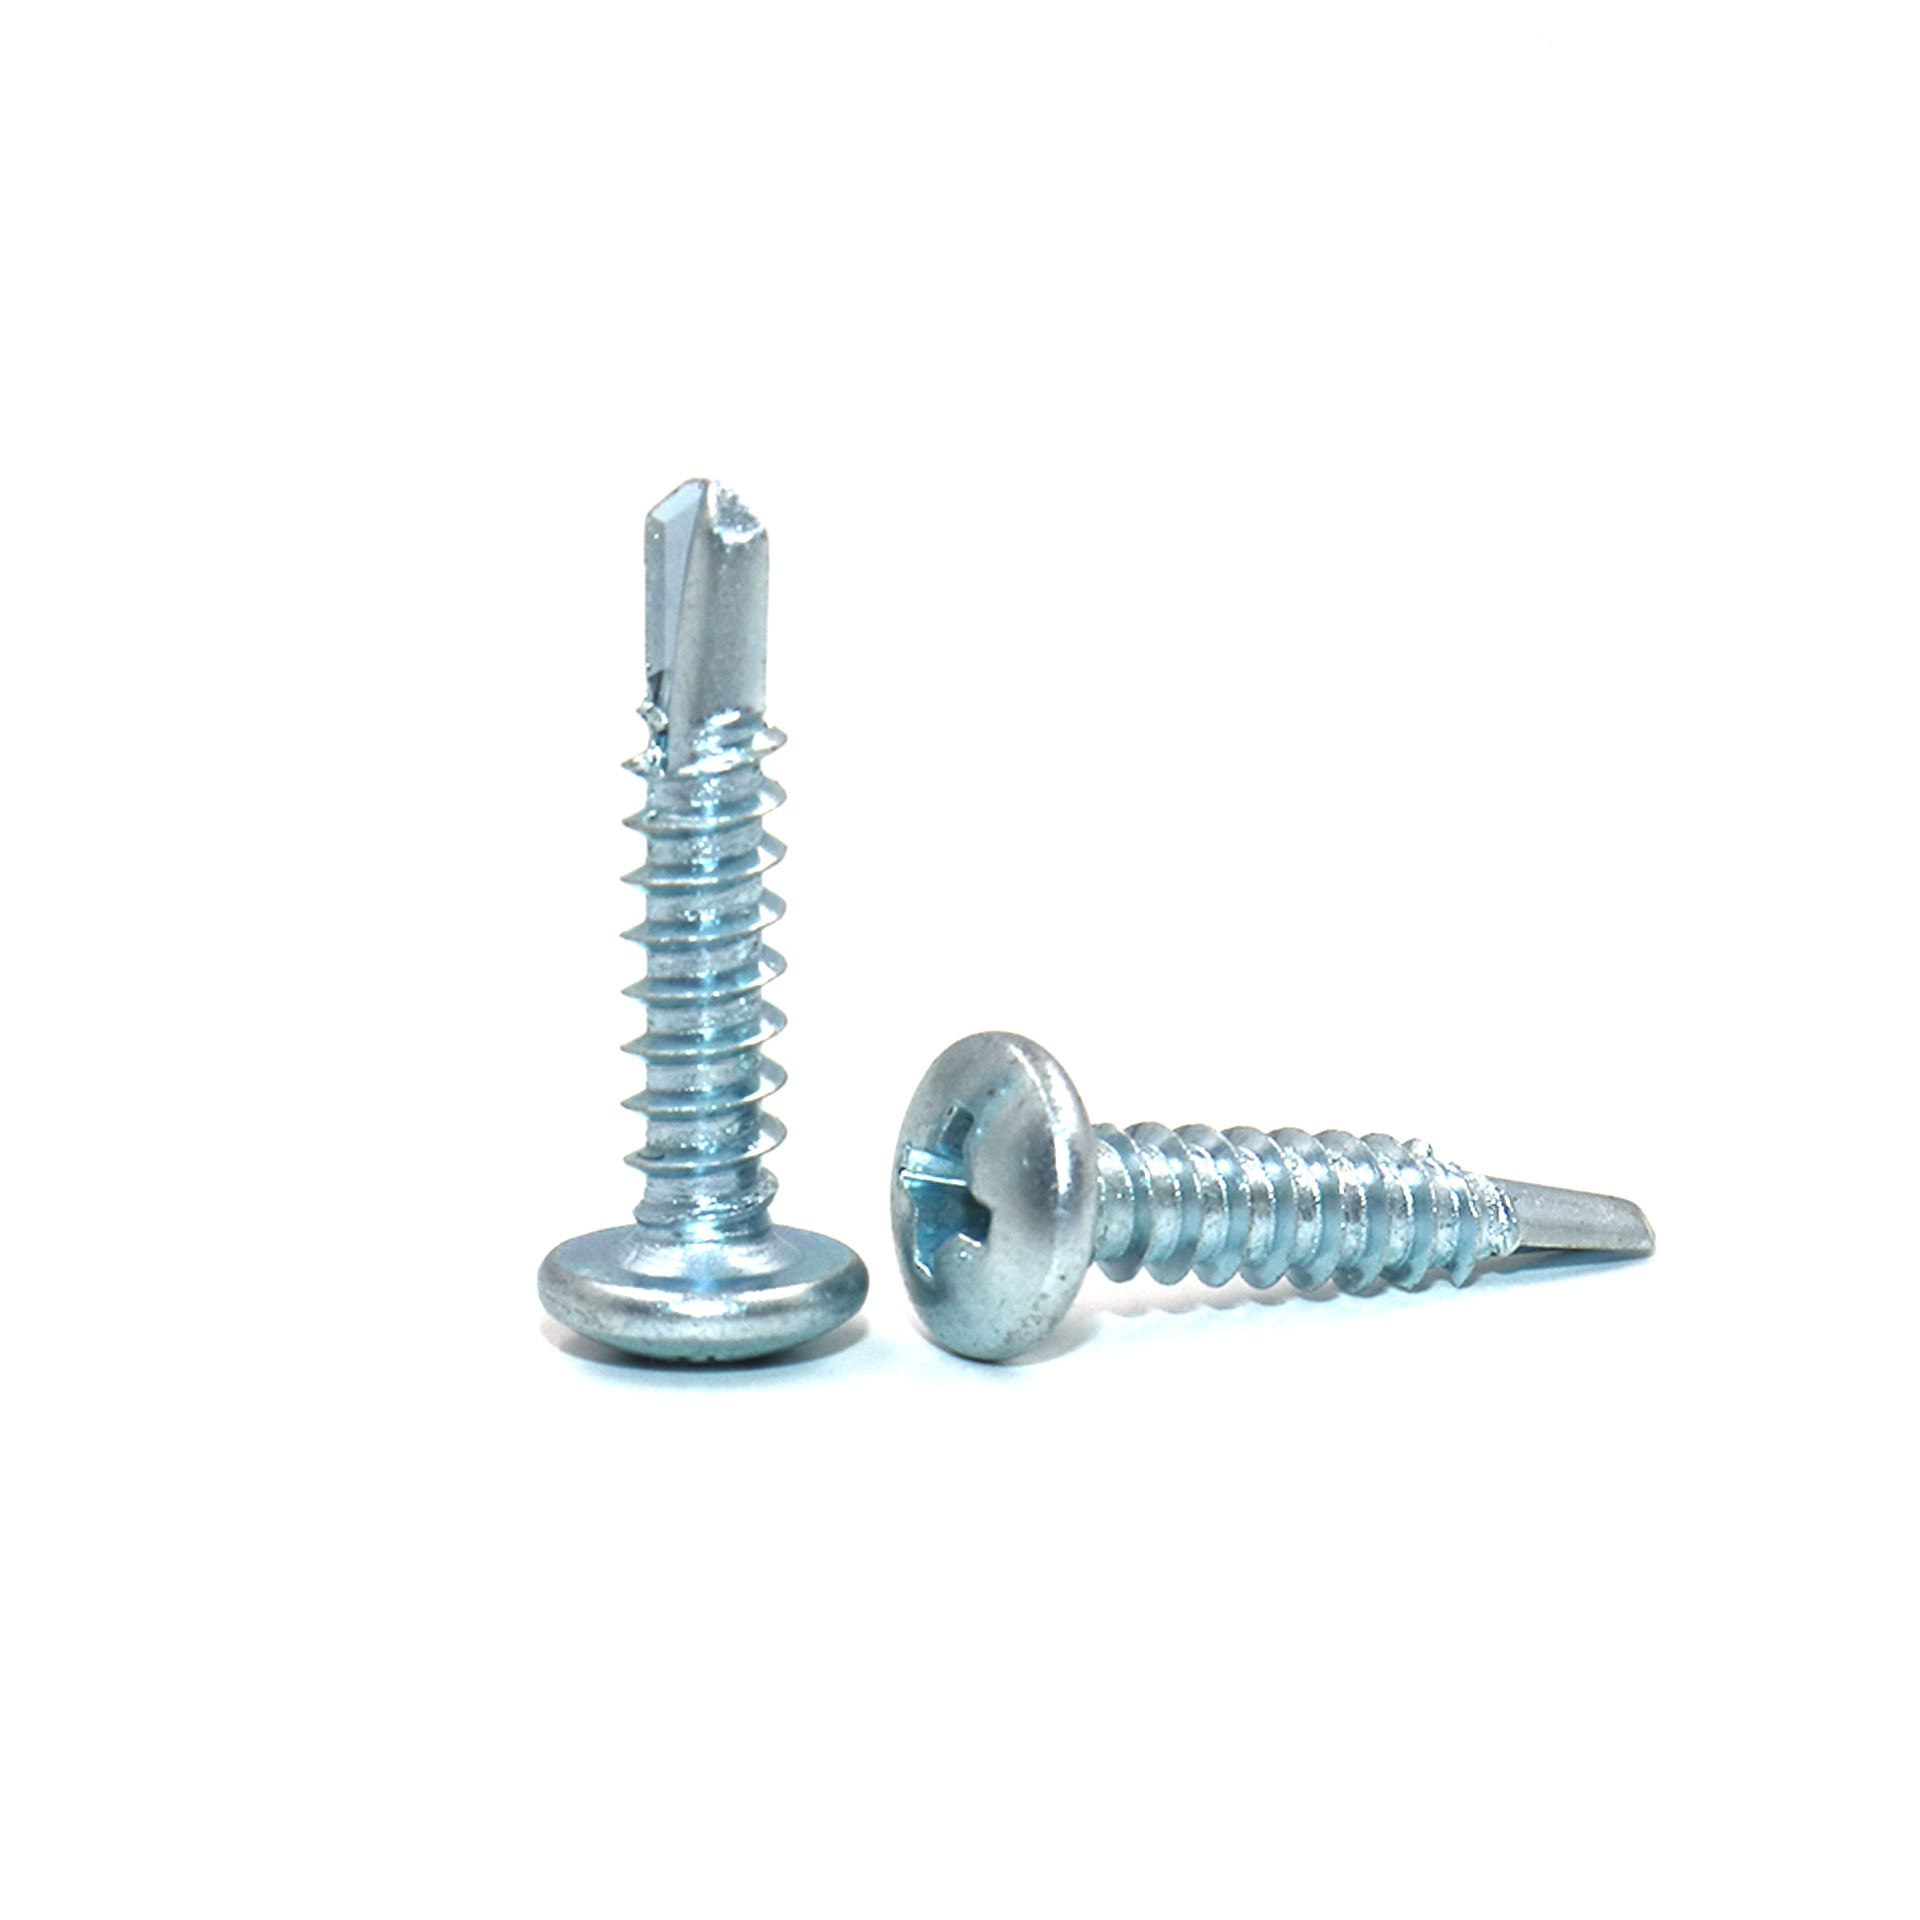 Q235 Carbon Steel Blue-white Zinc Plated Furniture Phillips Cross Recess Round Head Self Drilling Screws for Building Renovation Metal Sheet